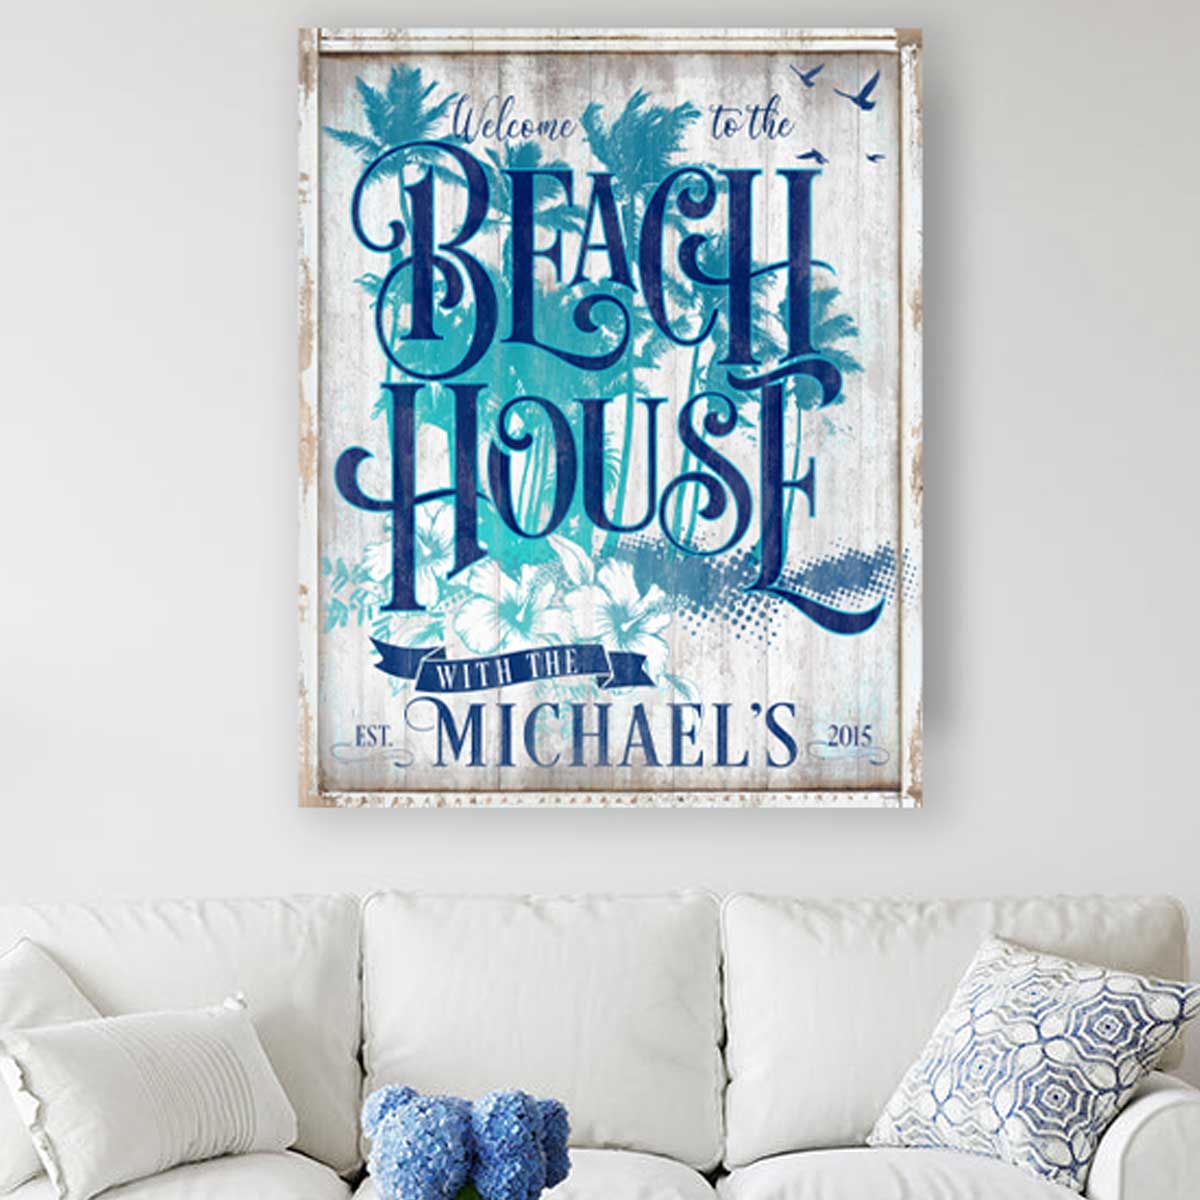 Beach house sign with palm tress in background and birds flying, with the words Beach House with the [family name] and est. date.